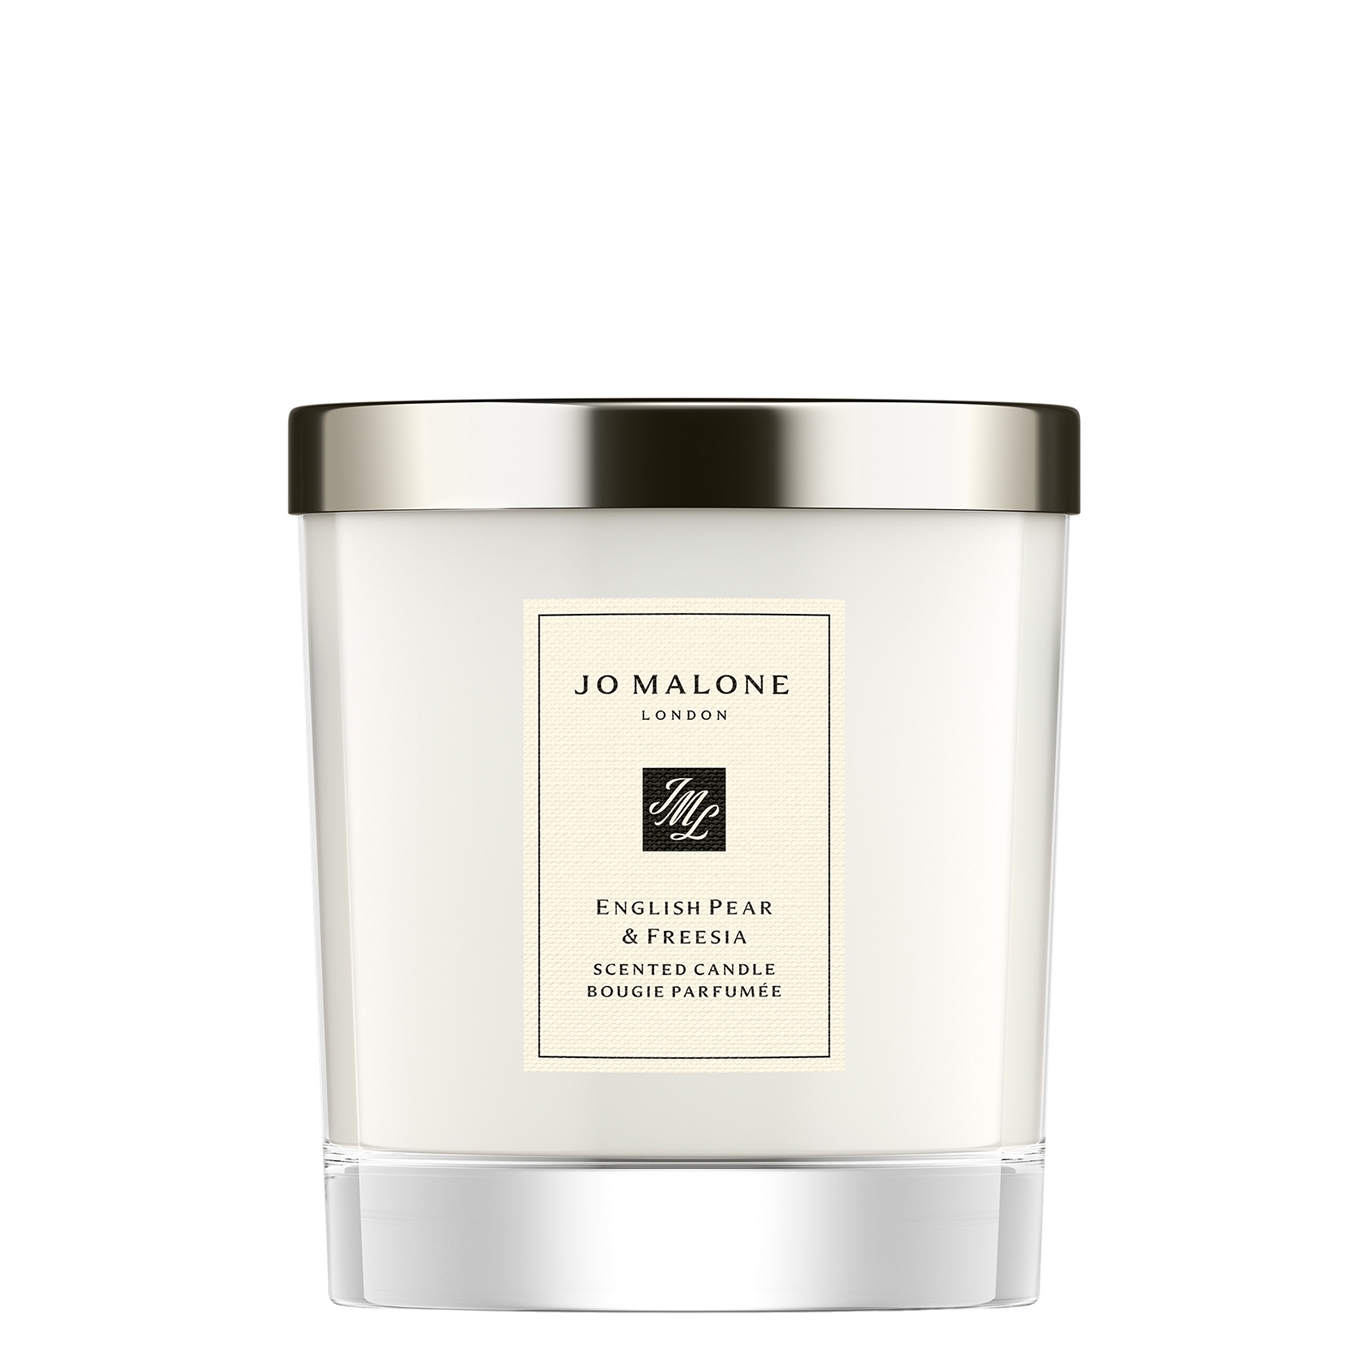 Jo Malone London English Pear & Freesia Home Candle, Fragrance, 200g In White